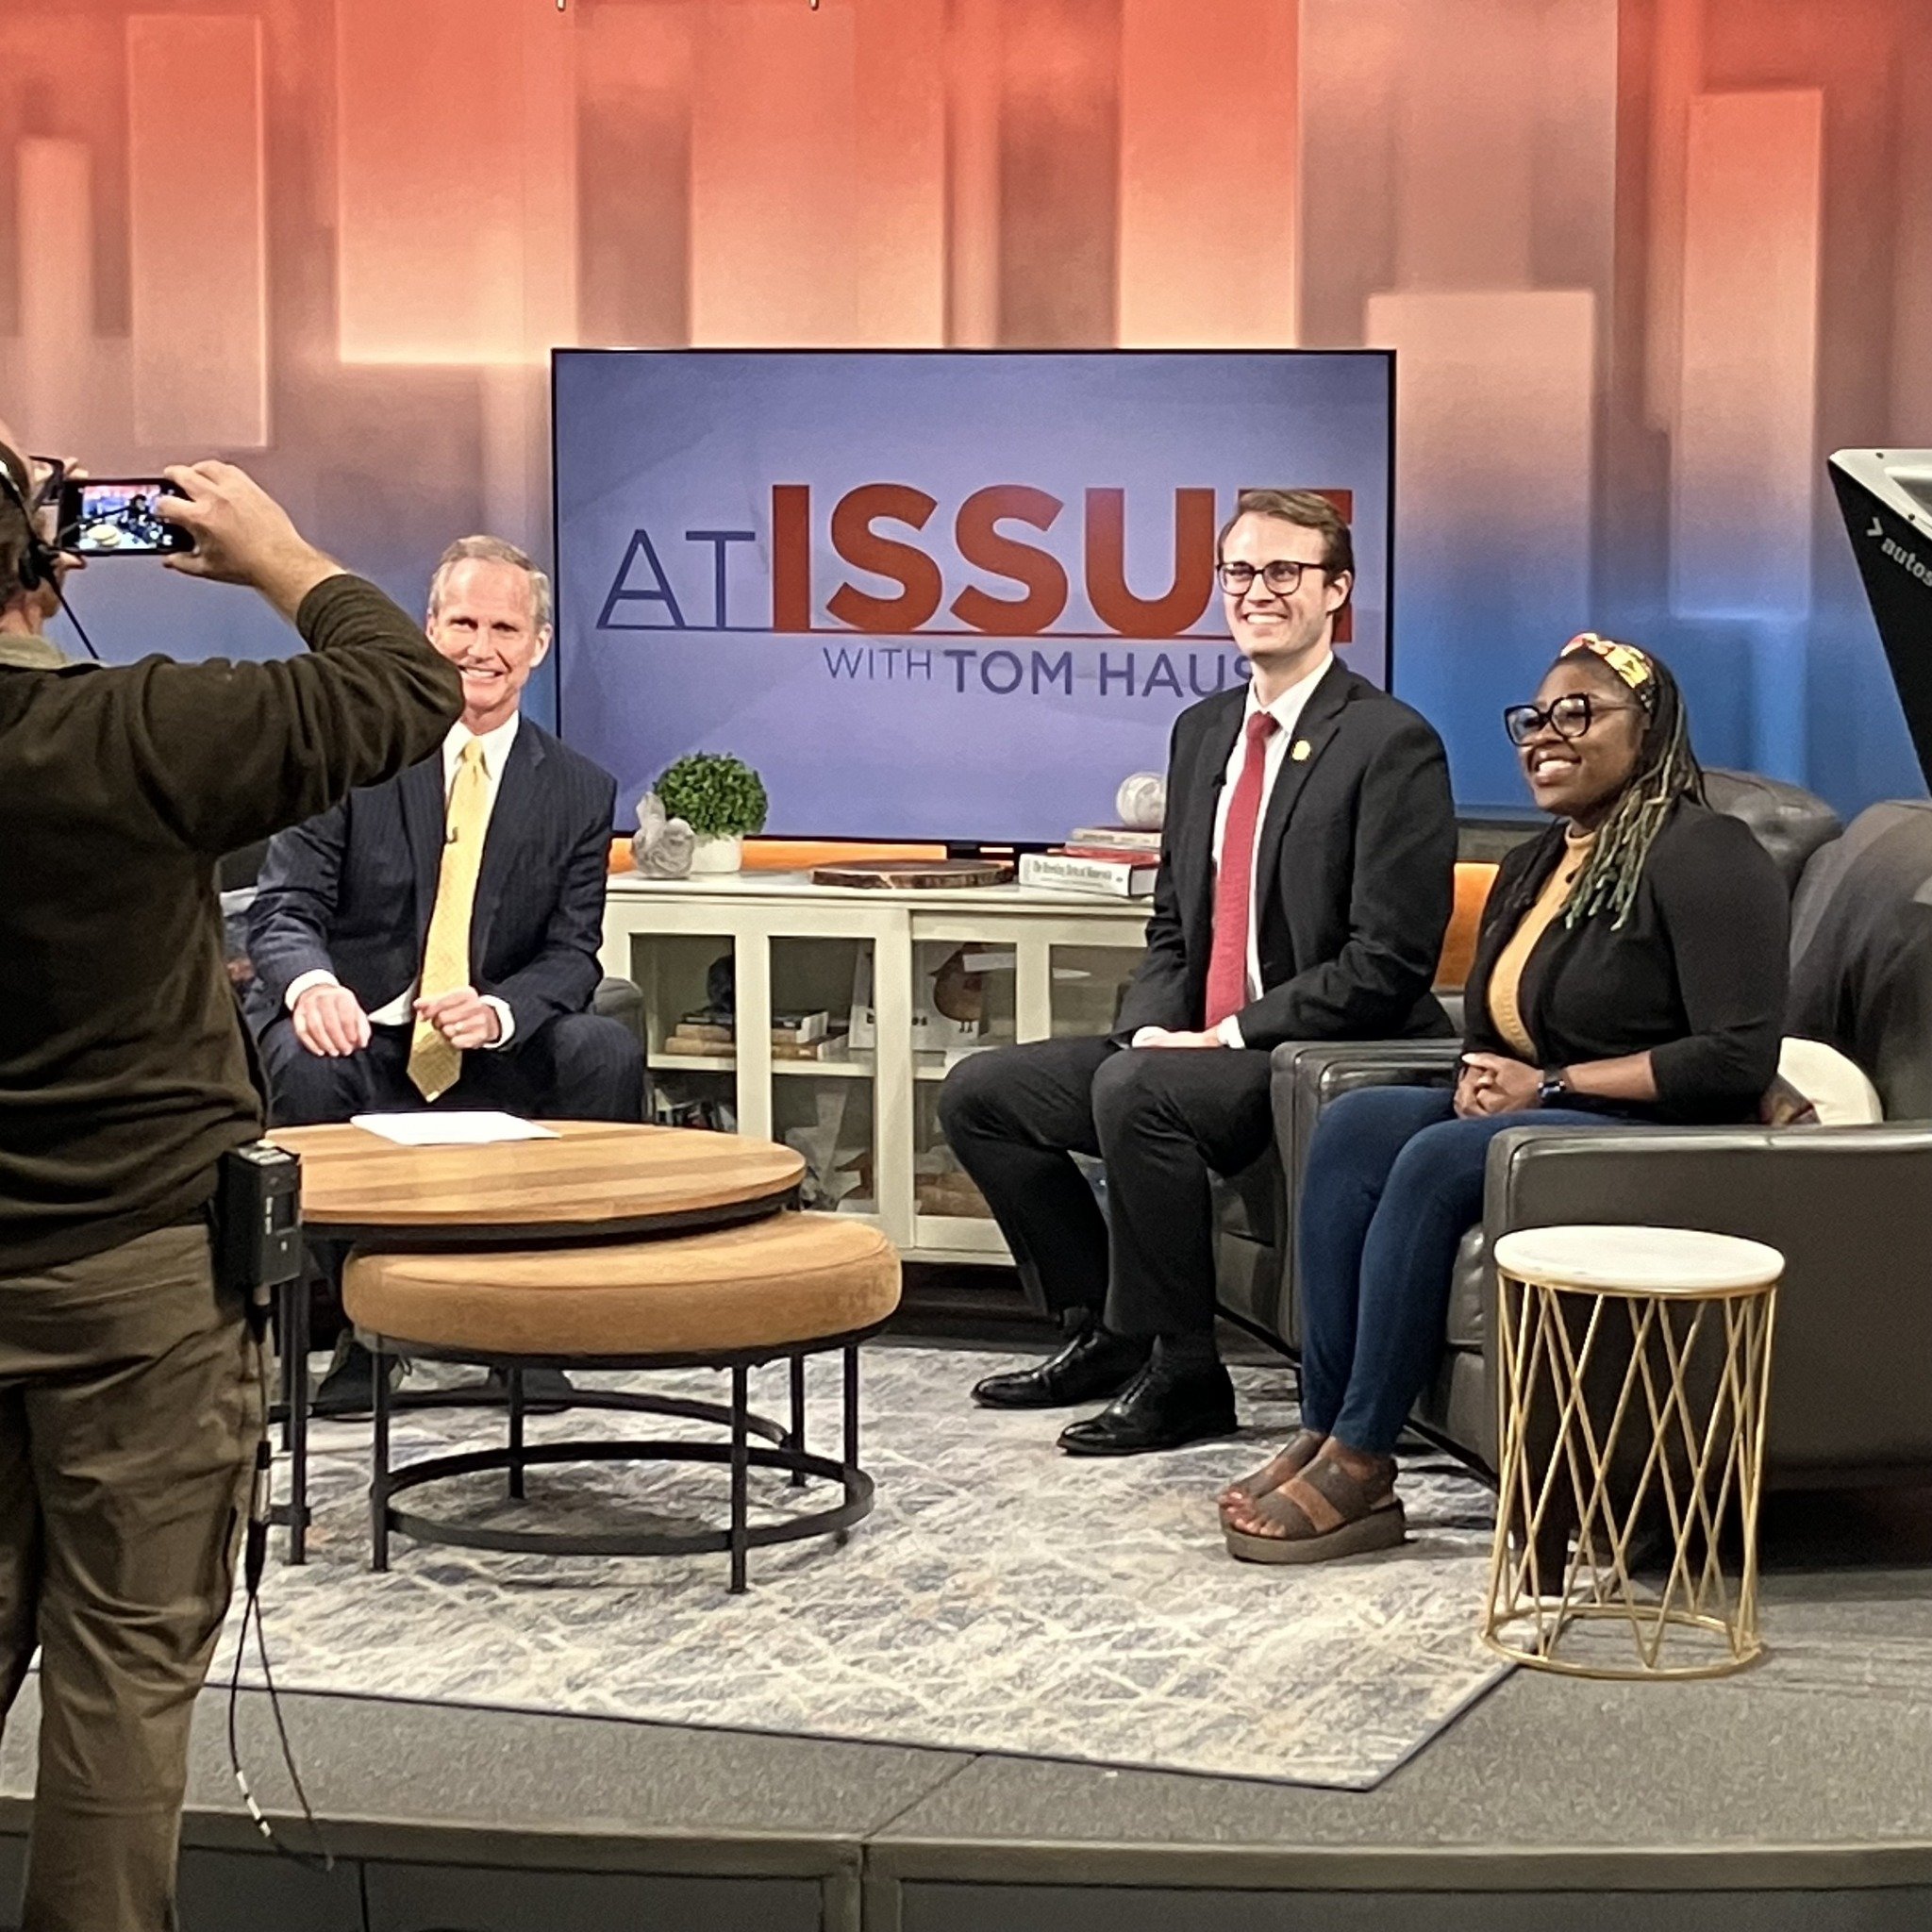 Across Minnesota, we all can agree that if you work for a living you should earn a living wage. Catch me on @kstptv At Issue with Tom Hauser this Sunday talking about how City Council and our state Legislative partners are working to ensure Uber and 